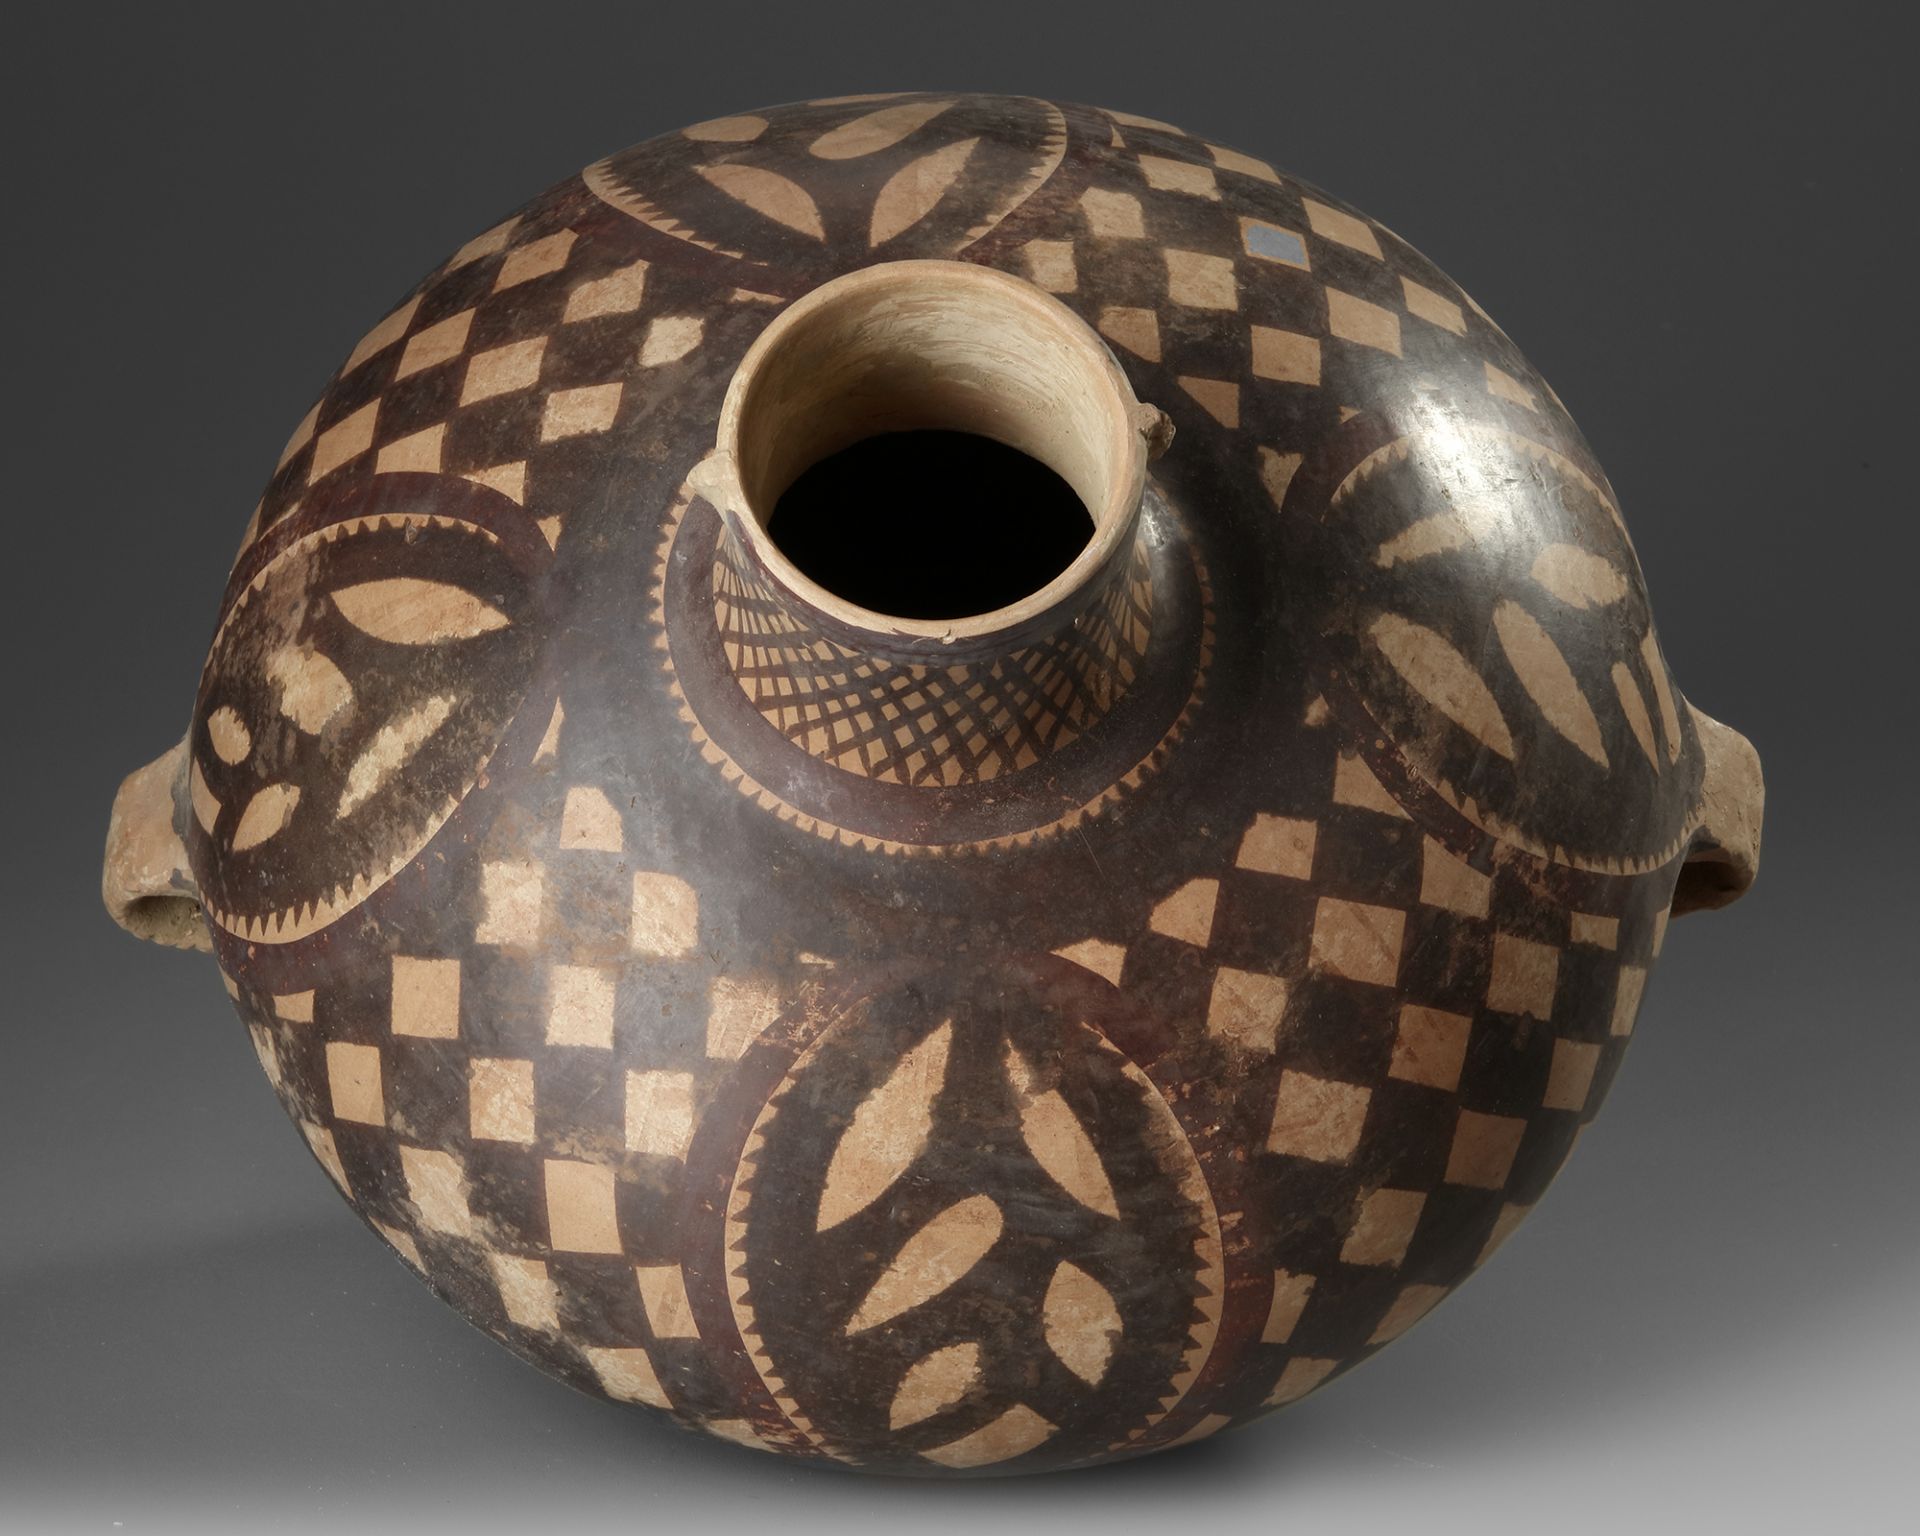 A CHINESE PAINTED POTTERY JAR, NEOLITHIC PERIOD, BANSHAN CULTURE GANSU PROVINCE, 3RD CENTURY - Image 3 of 3